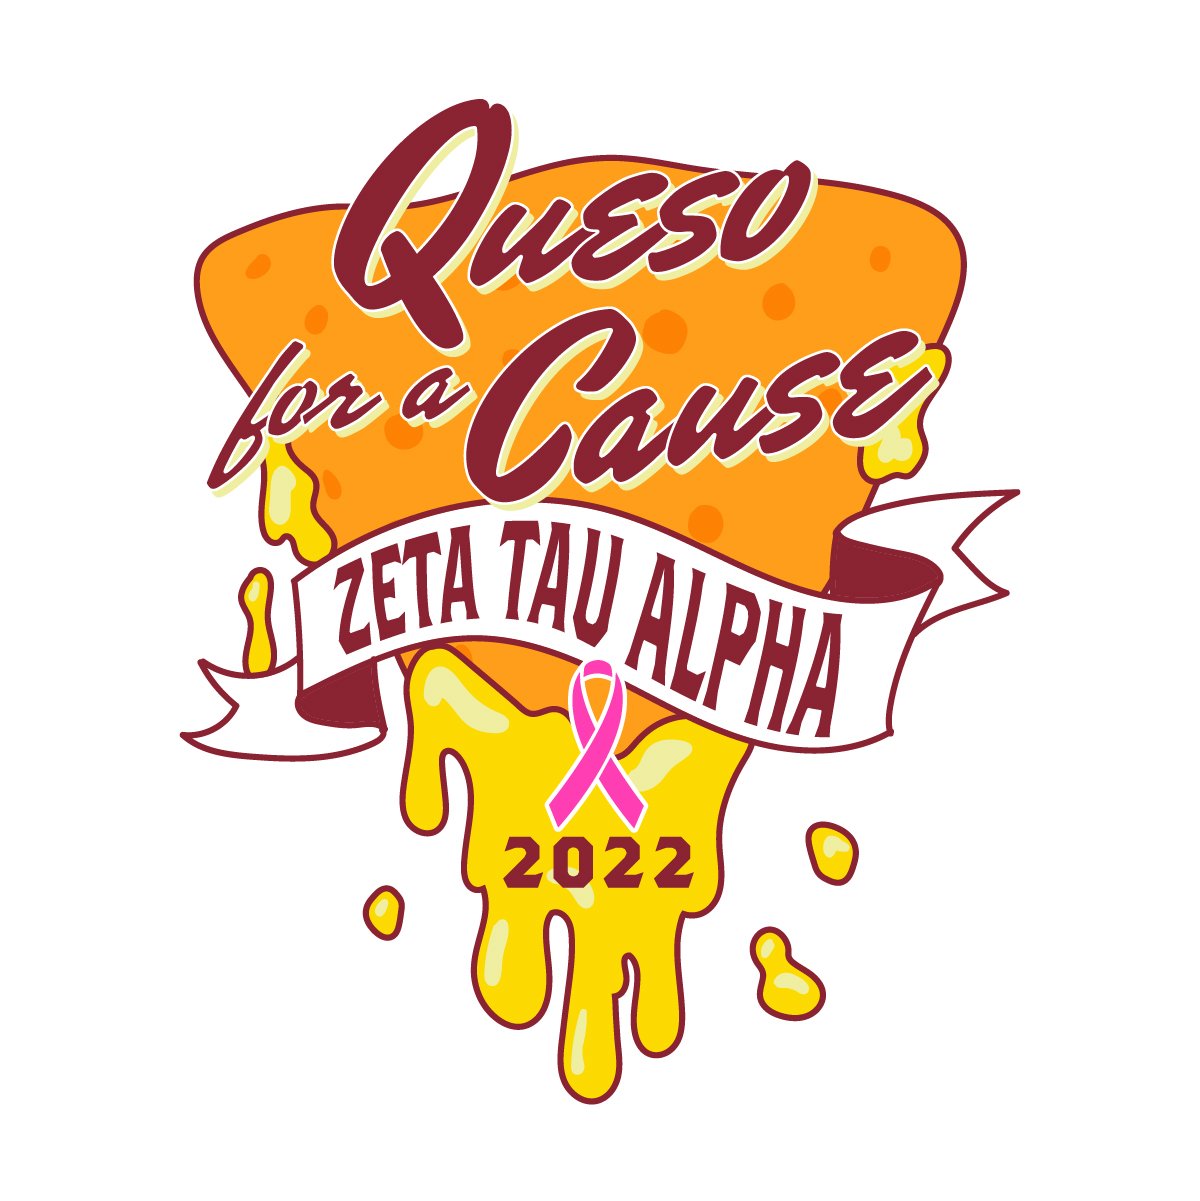 Queso For A Cause